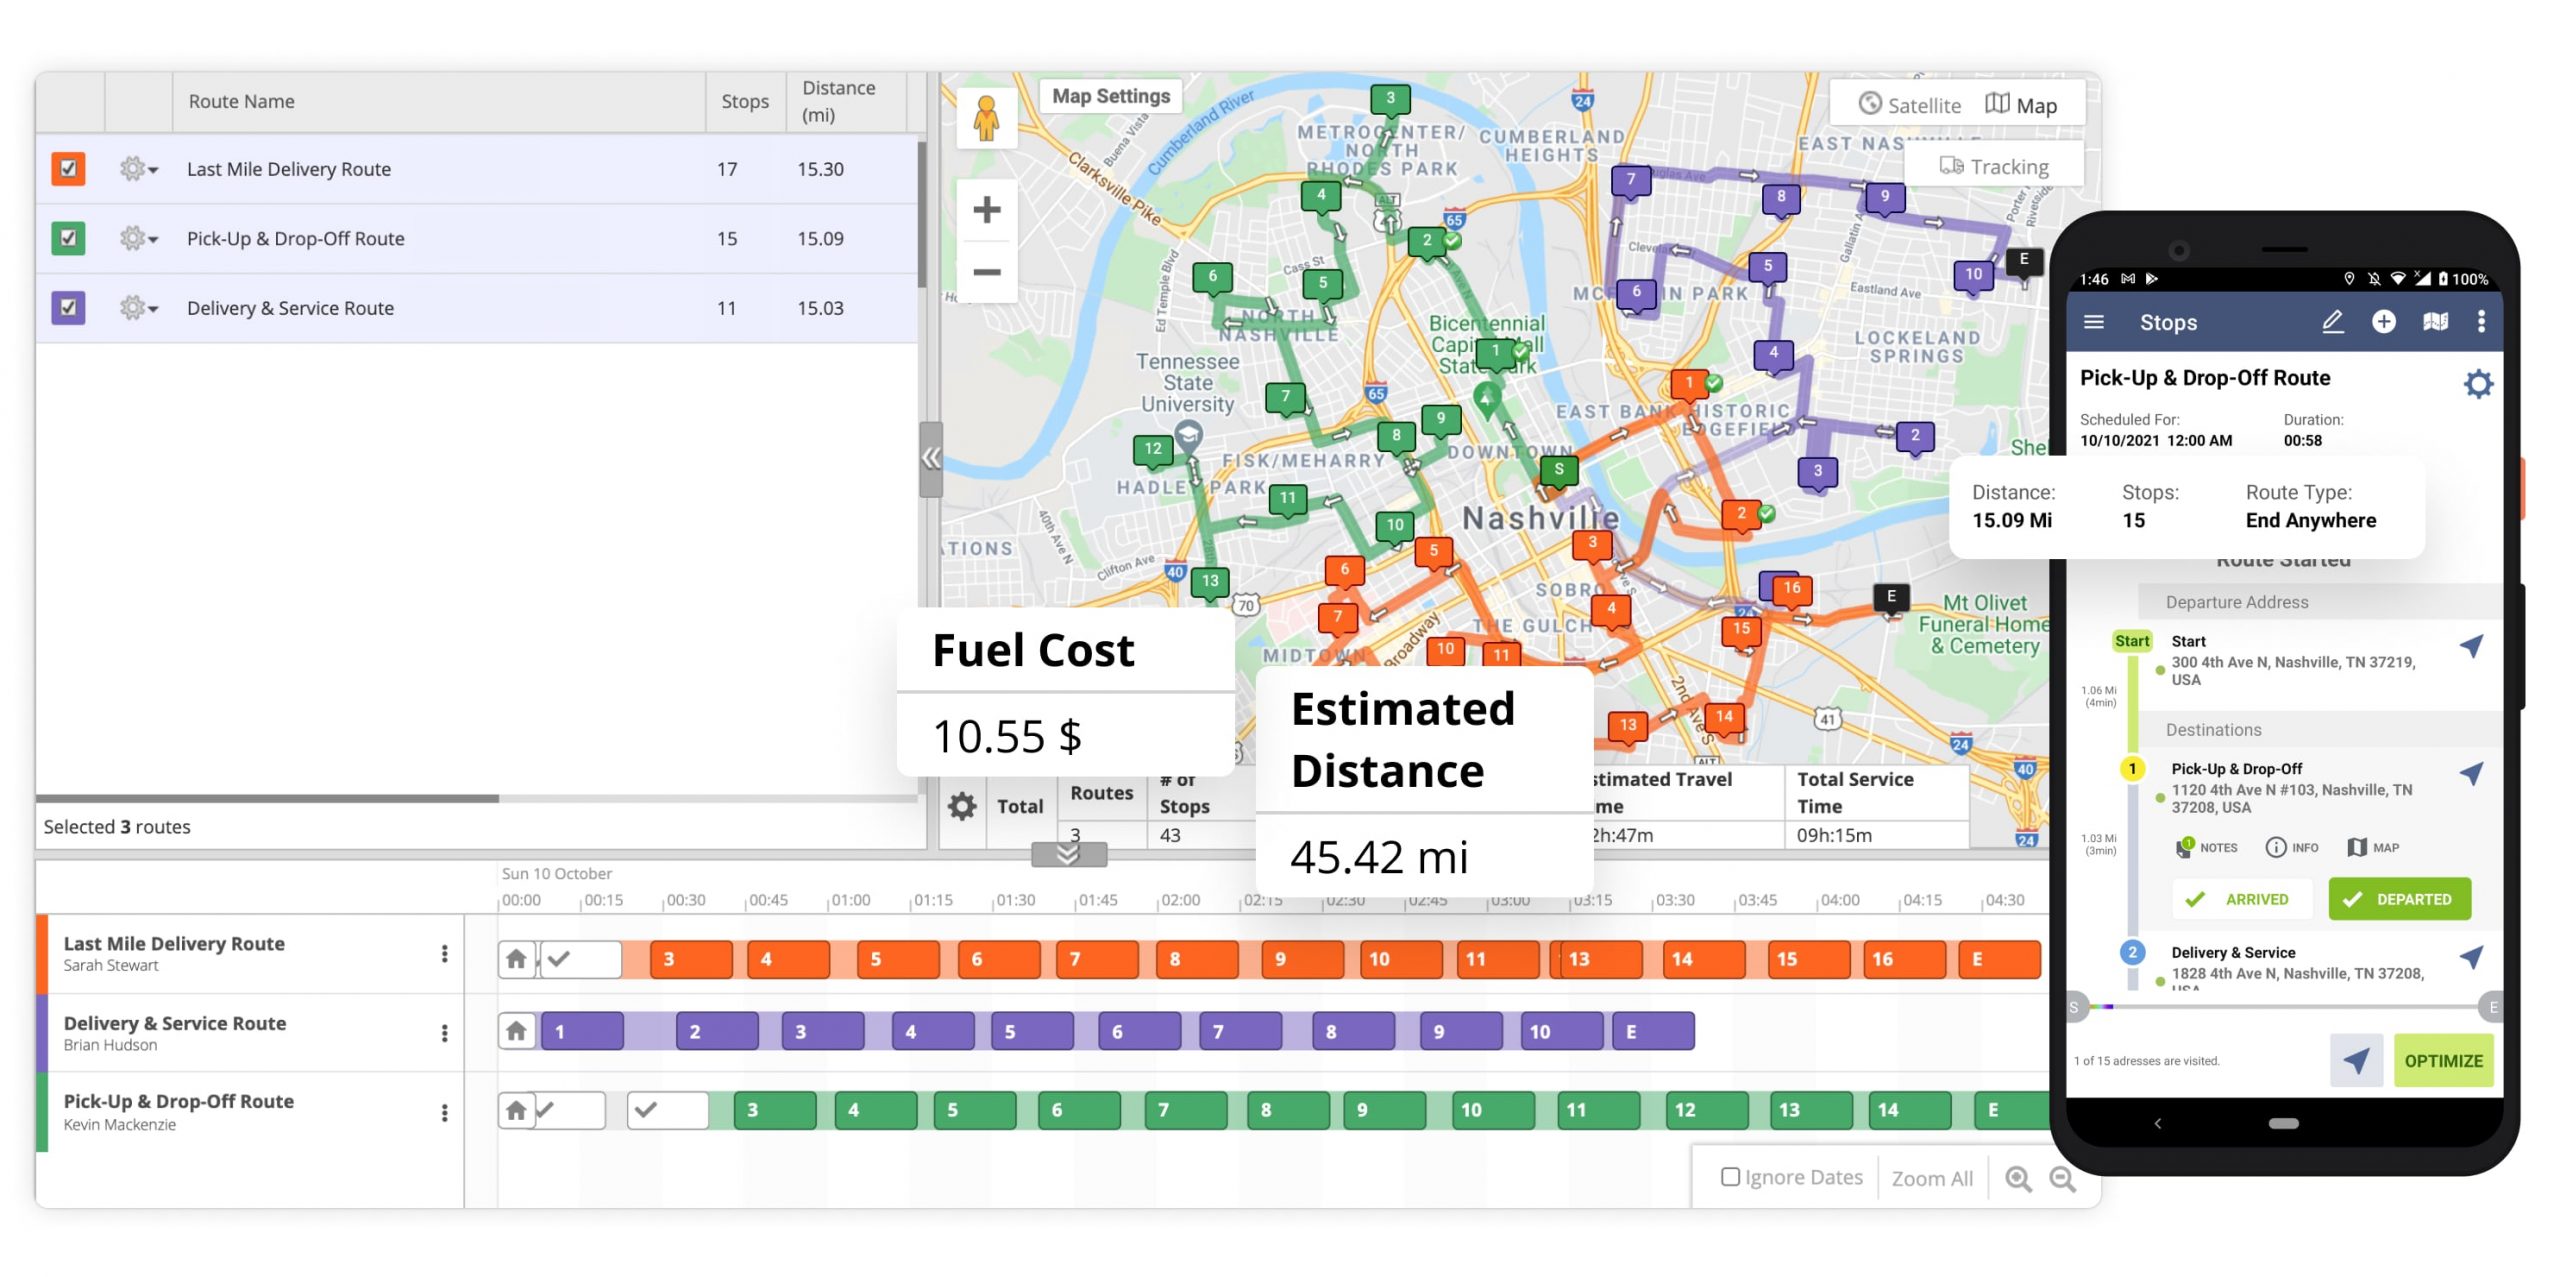 Route4Me calculates route distance and vehicle fuel consumption to estimate fuel costs.